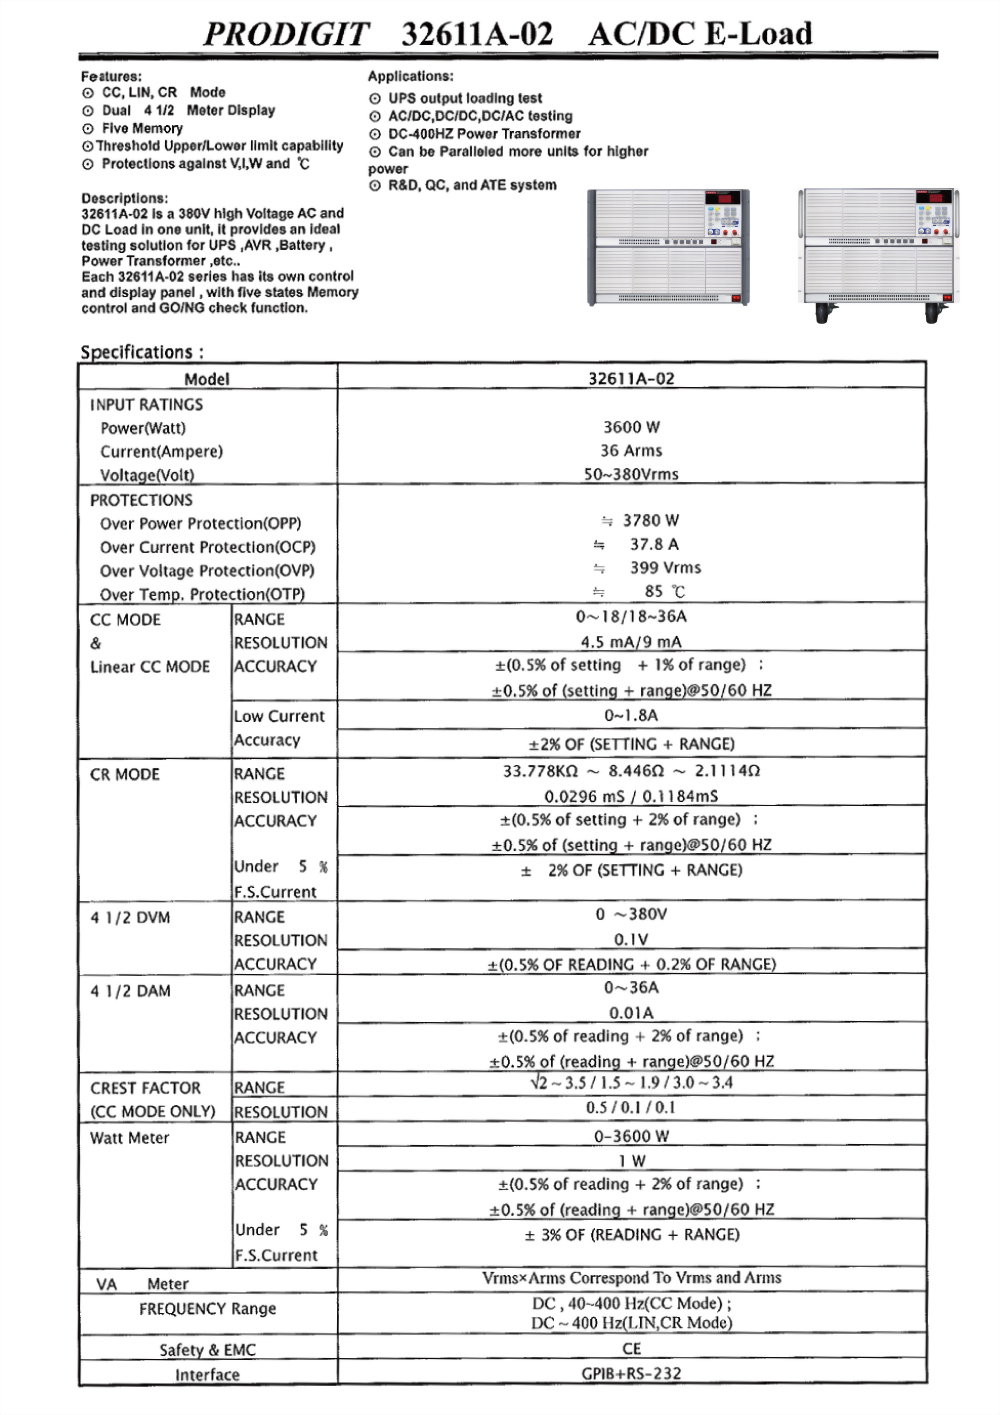 32611a-02_specifications.jpg